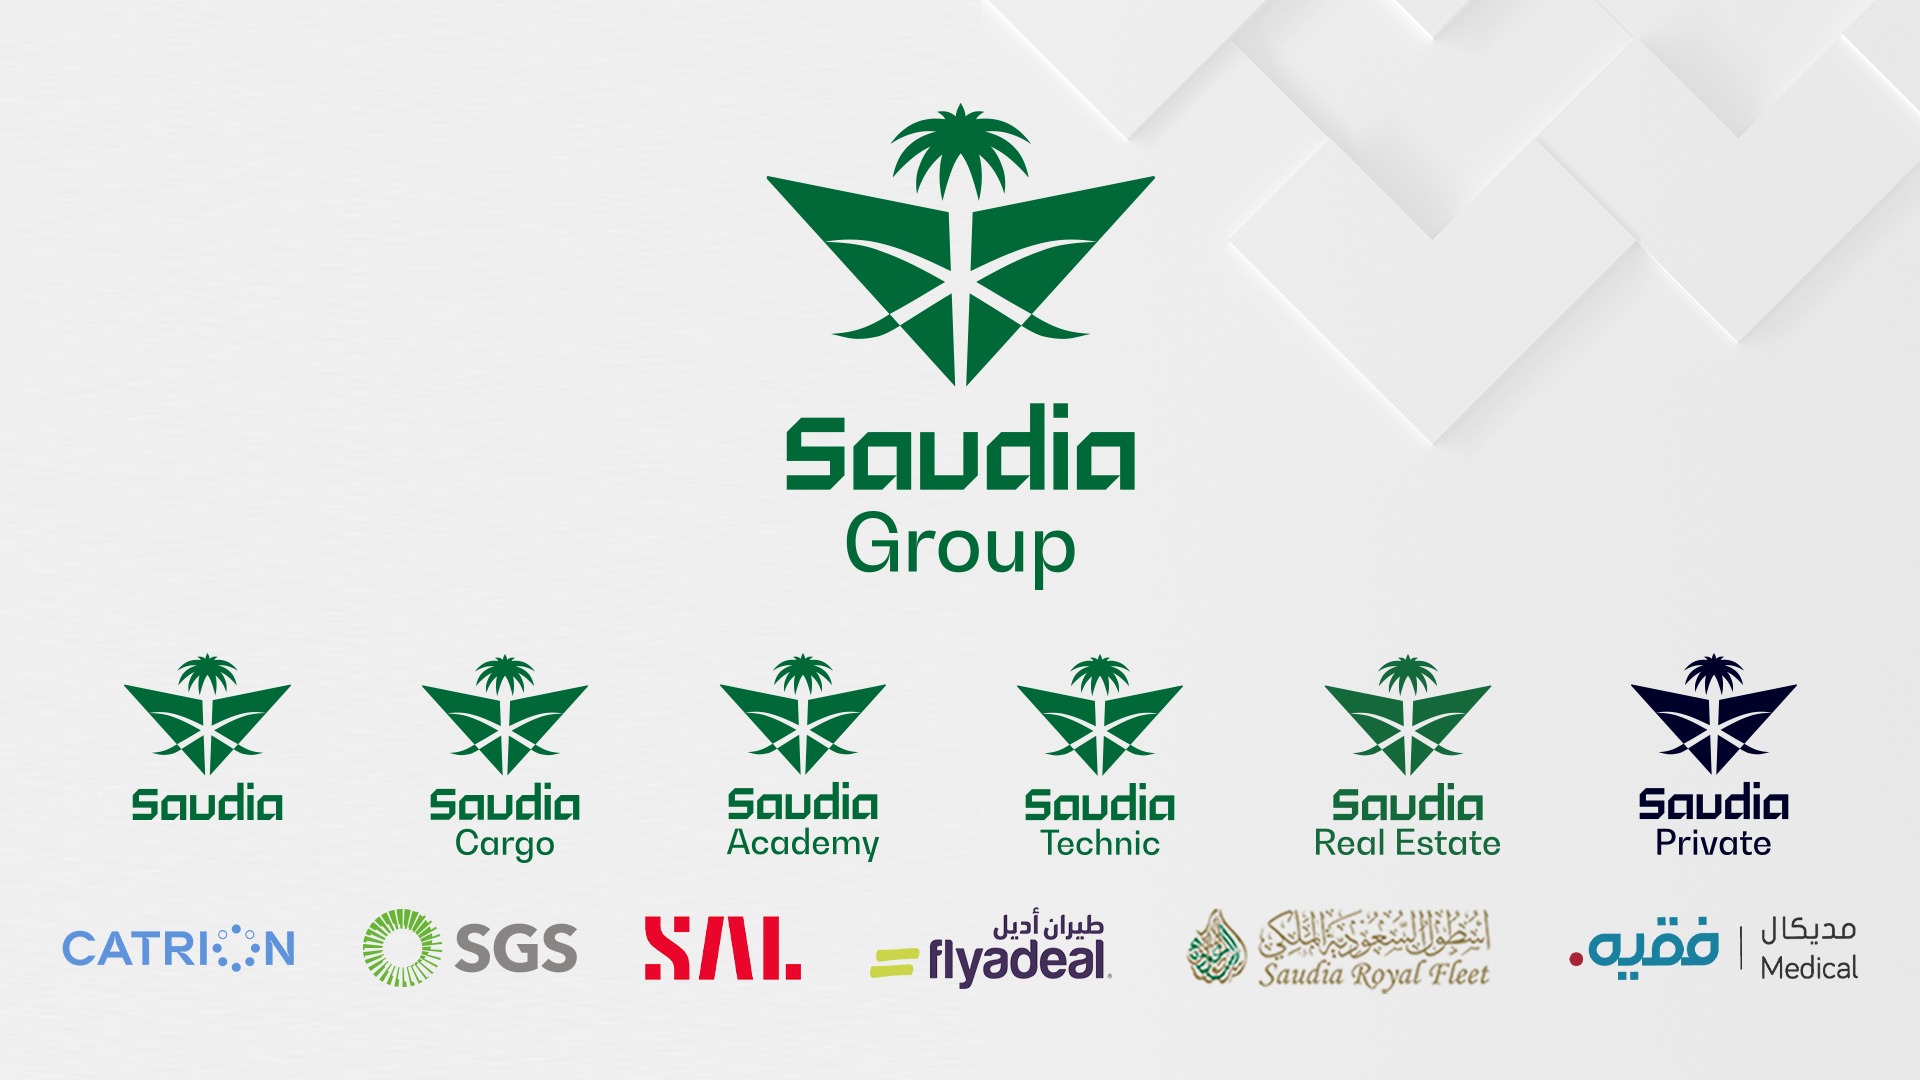 Saudia Group new brand identity prioritises growth, expansion & localisation